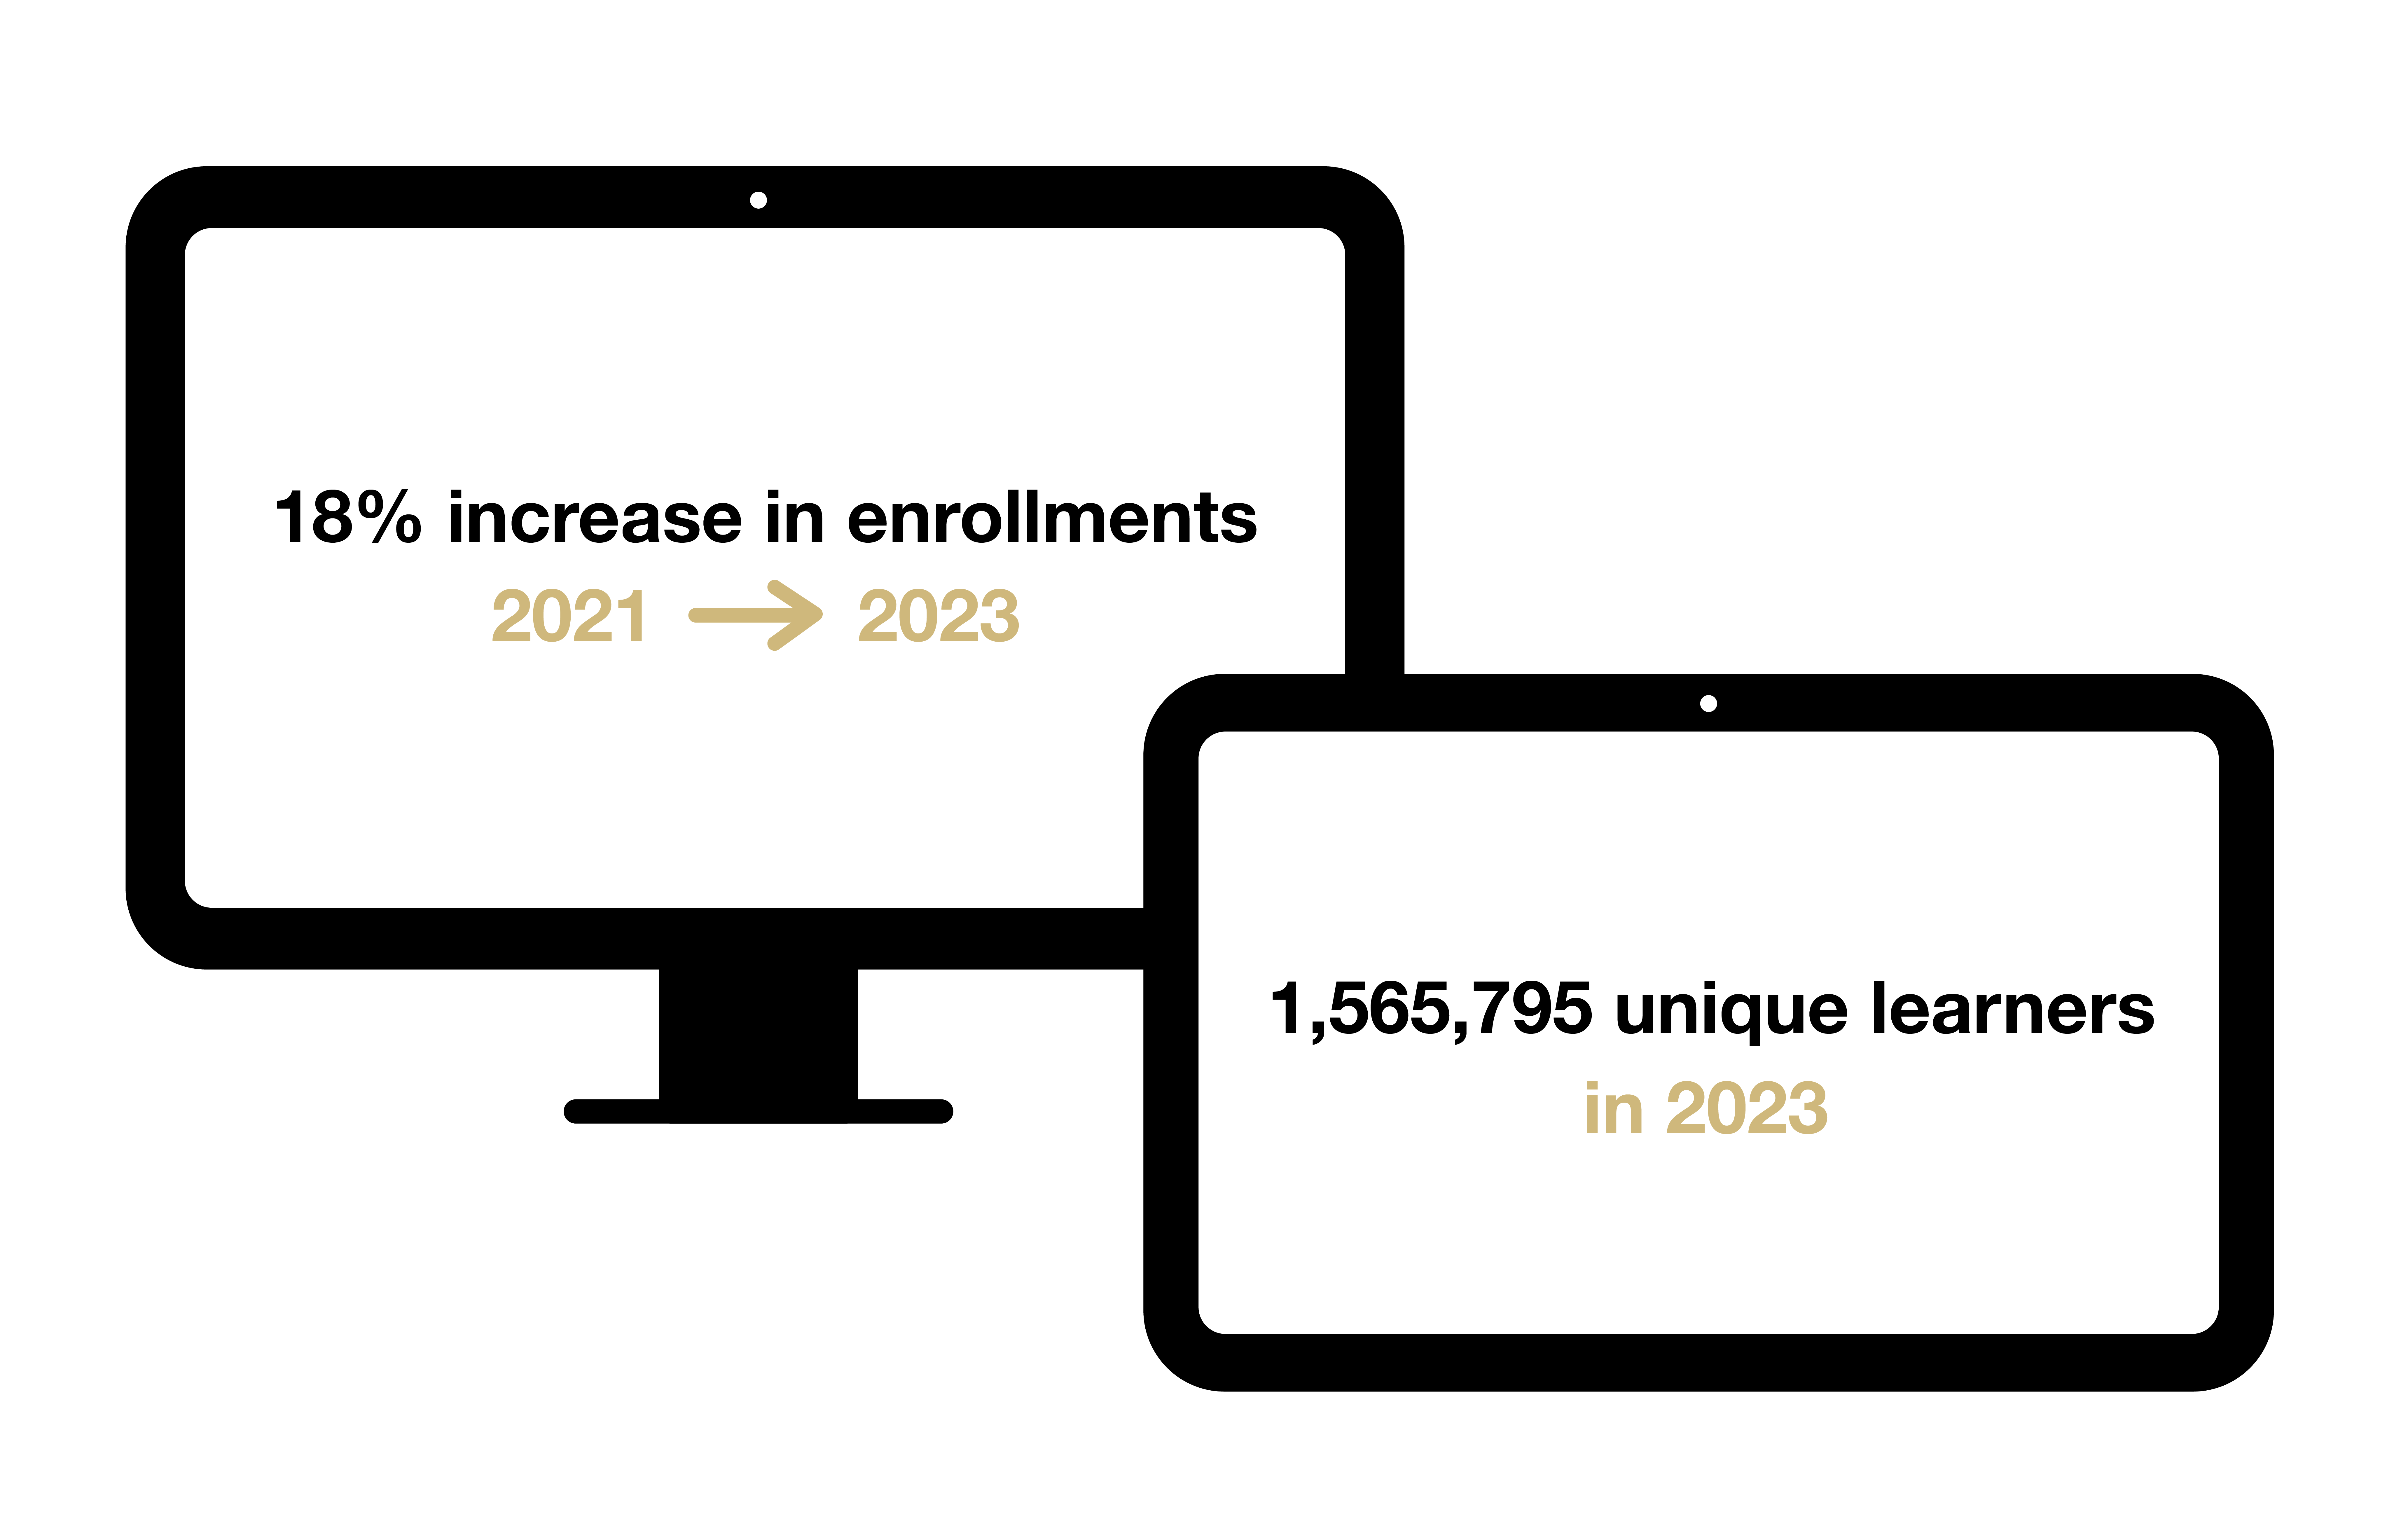 2023 MOOC Statistics: 18% increase in enrollments since 2021. 1,565,795 unique learners in 2023.